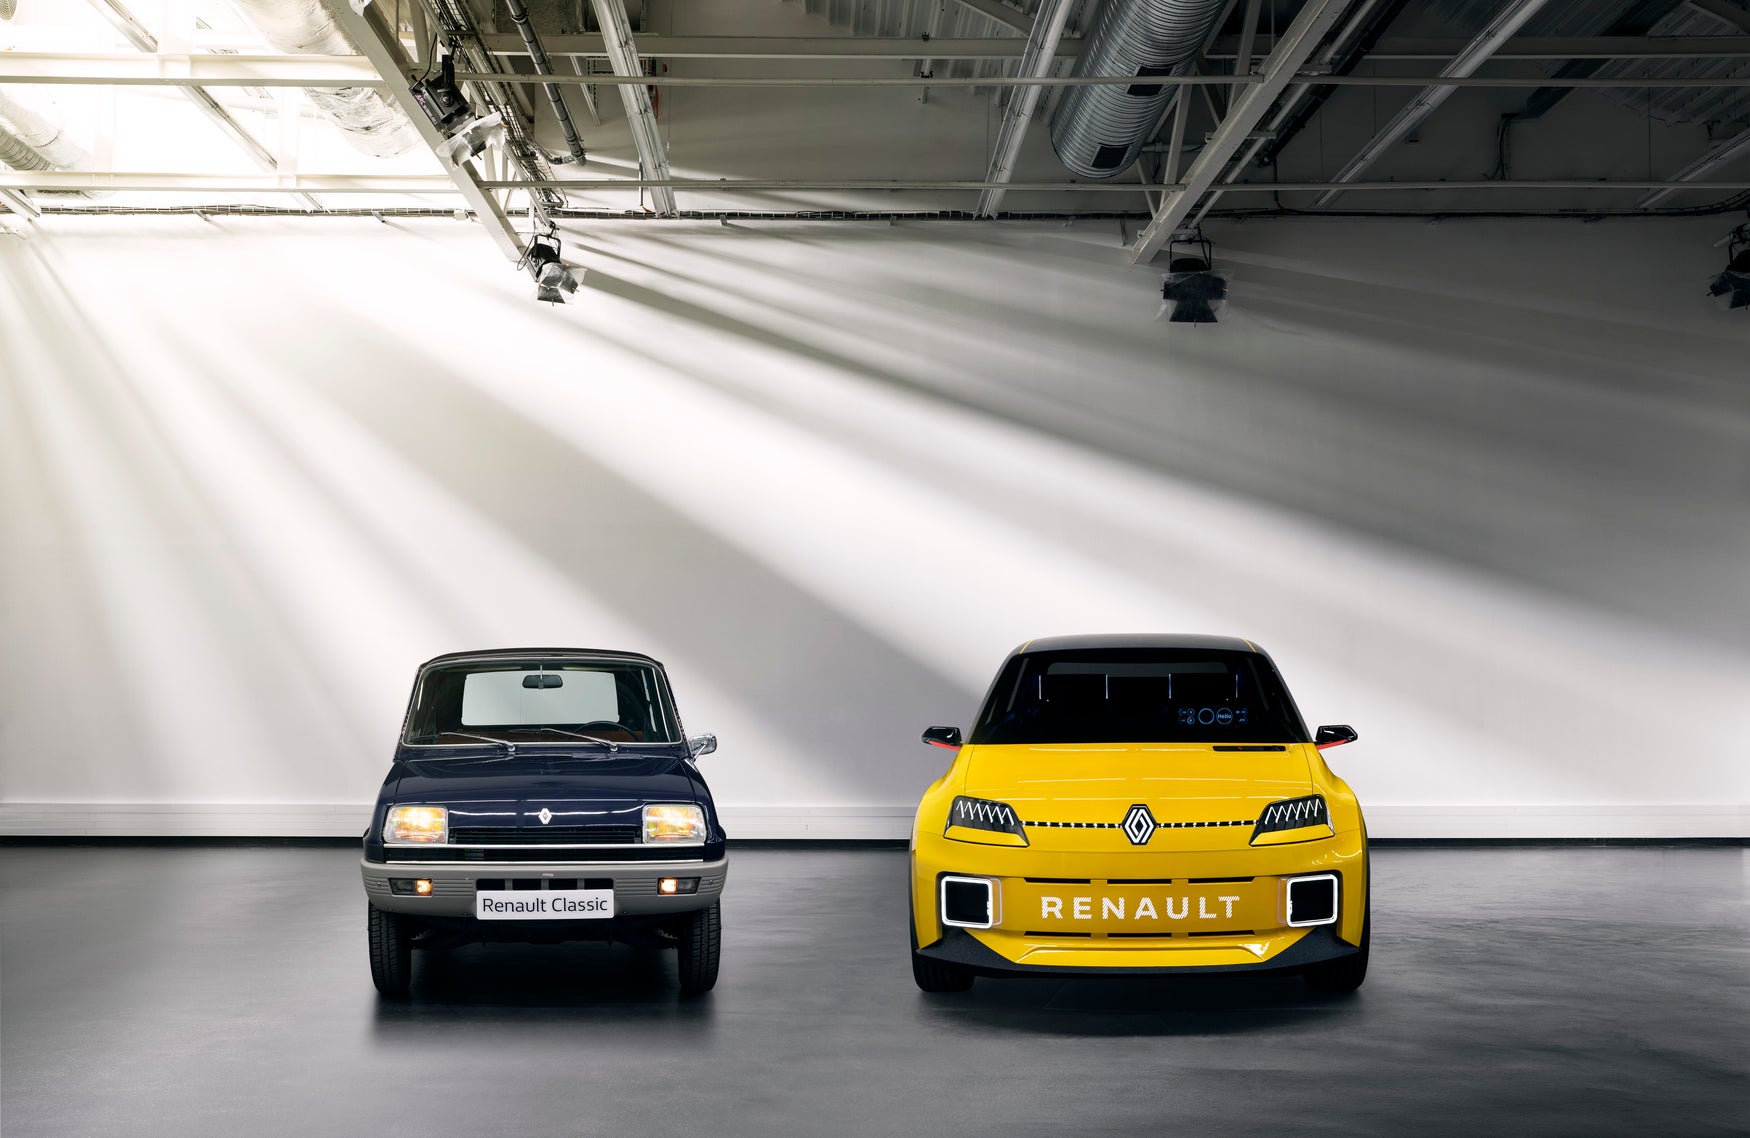 Old and new Renault 5s